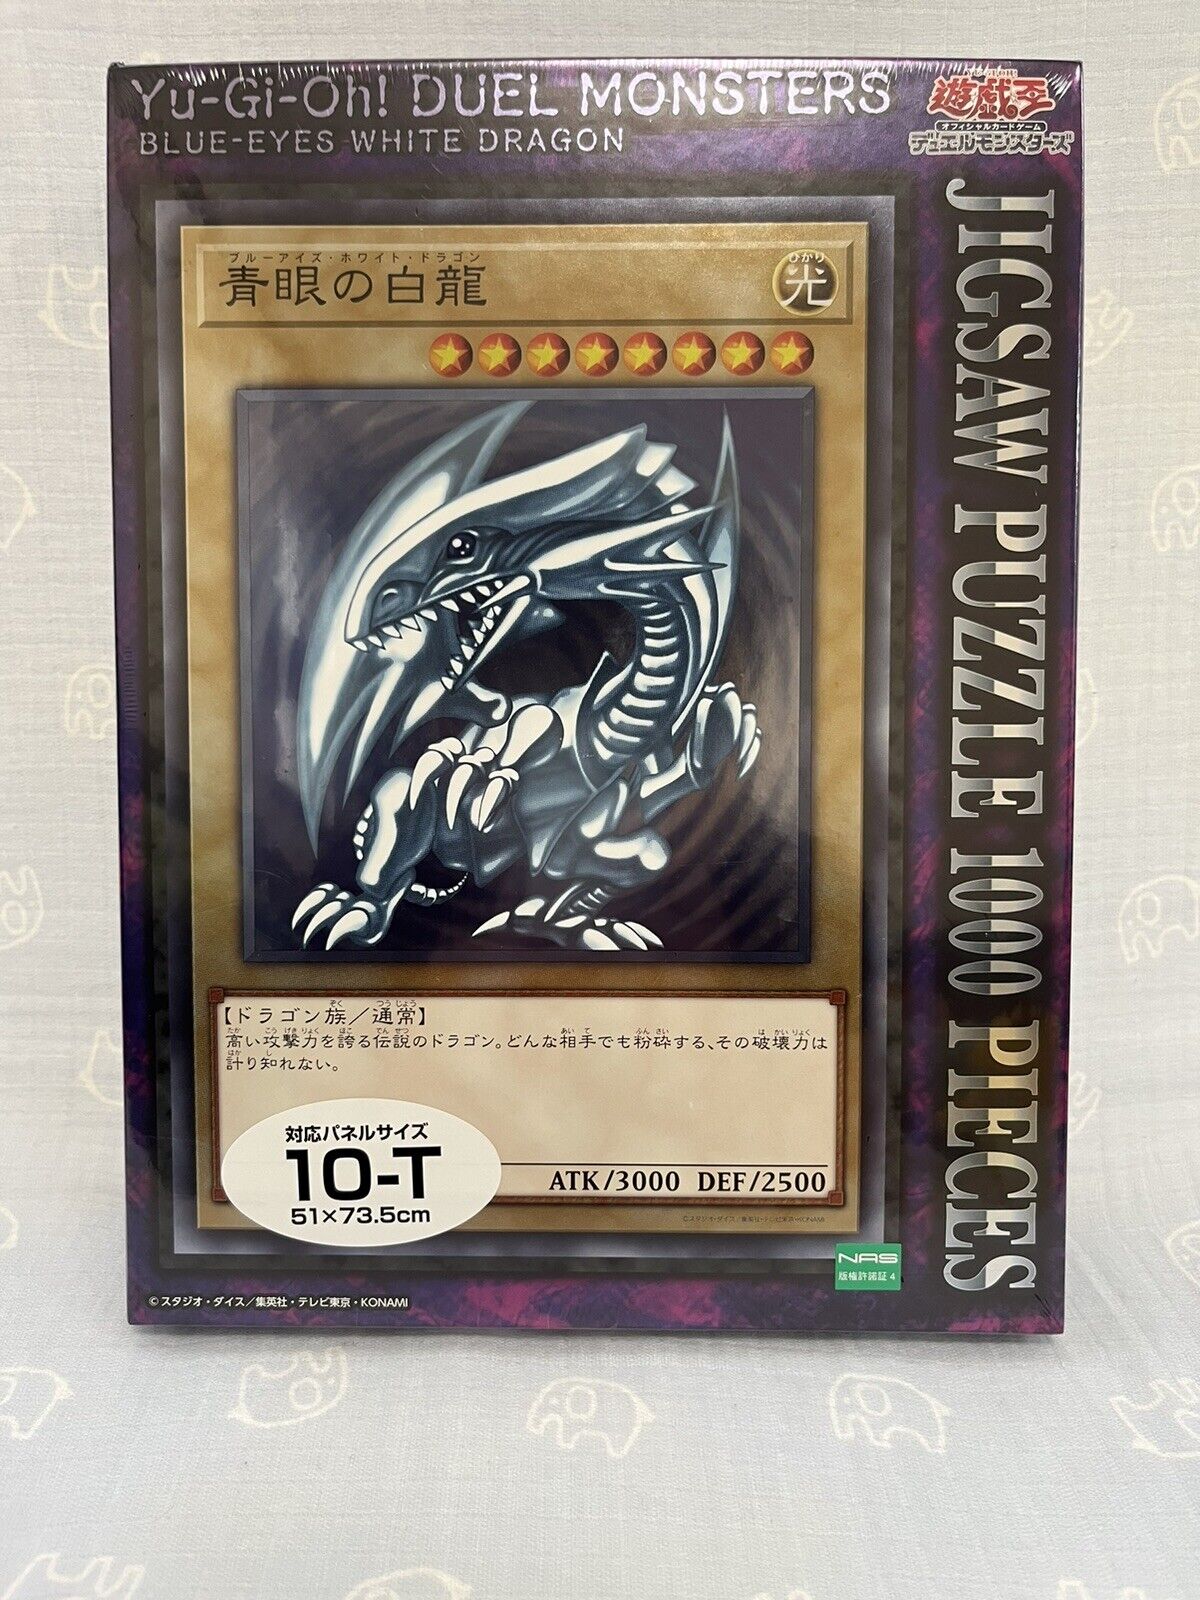 YUGIOH Jigsaw puzzle Blue-Eyes White Dragon 1000Peaces(51cm×73.5cm) from Japan